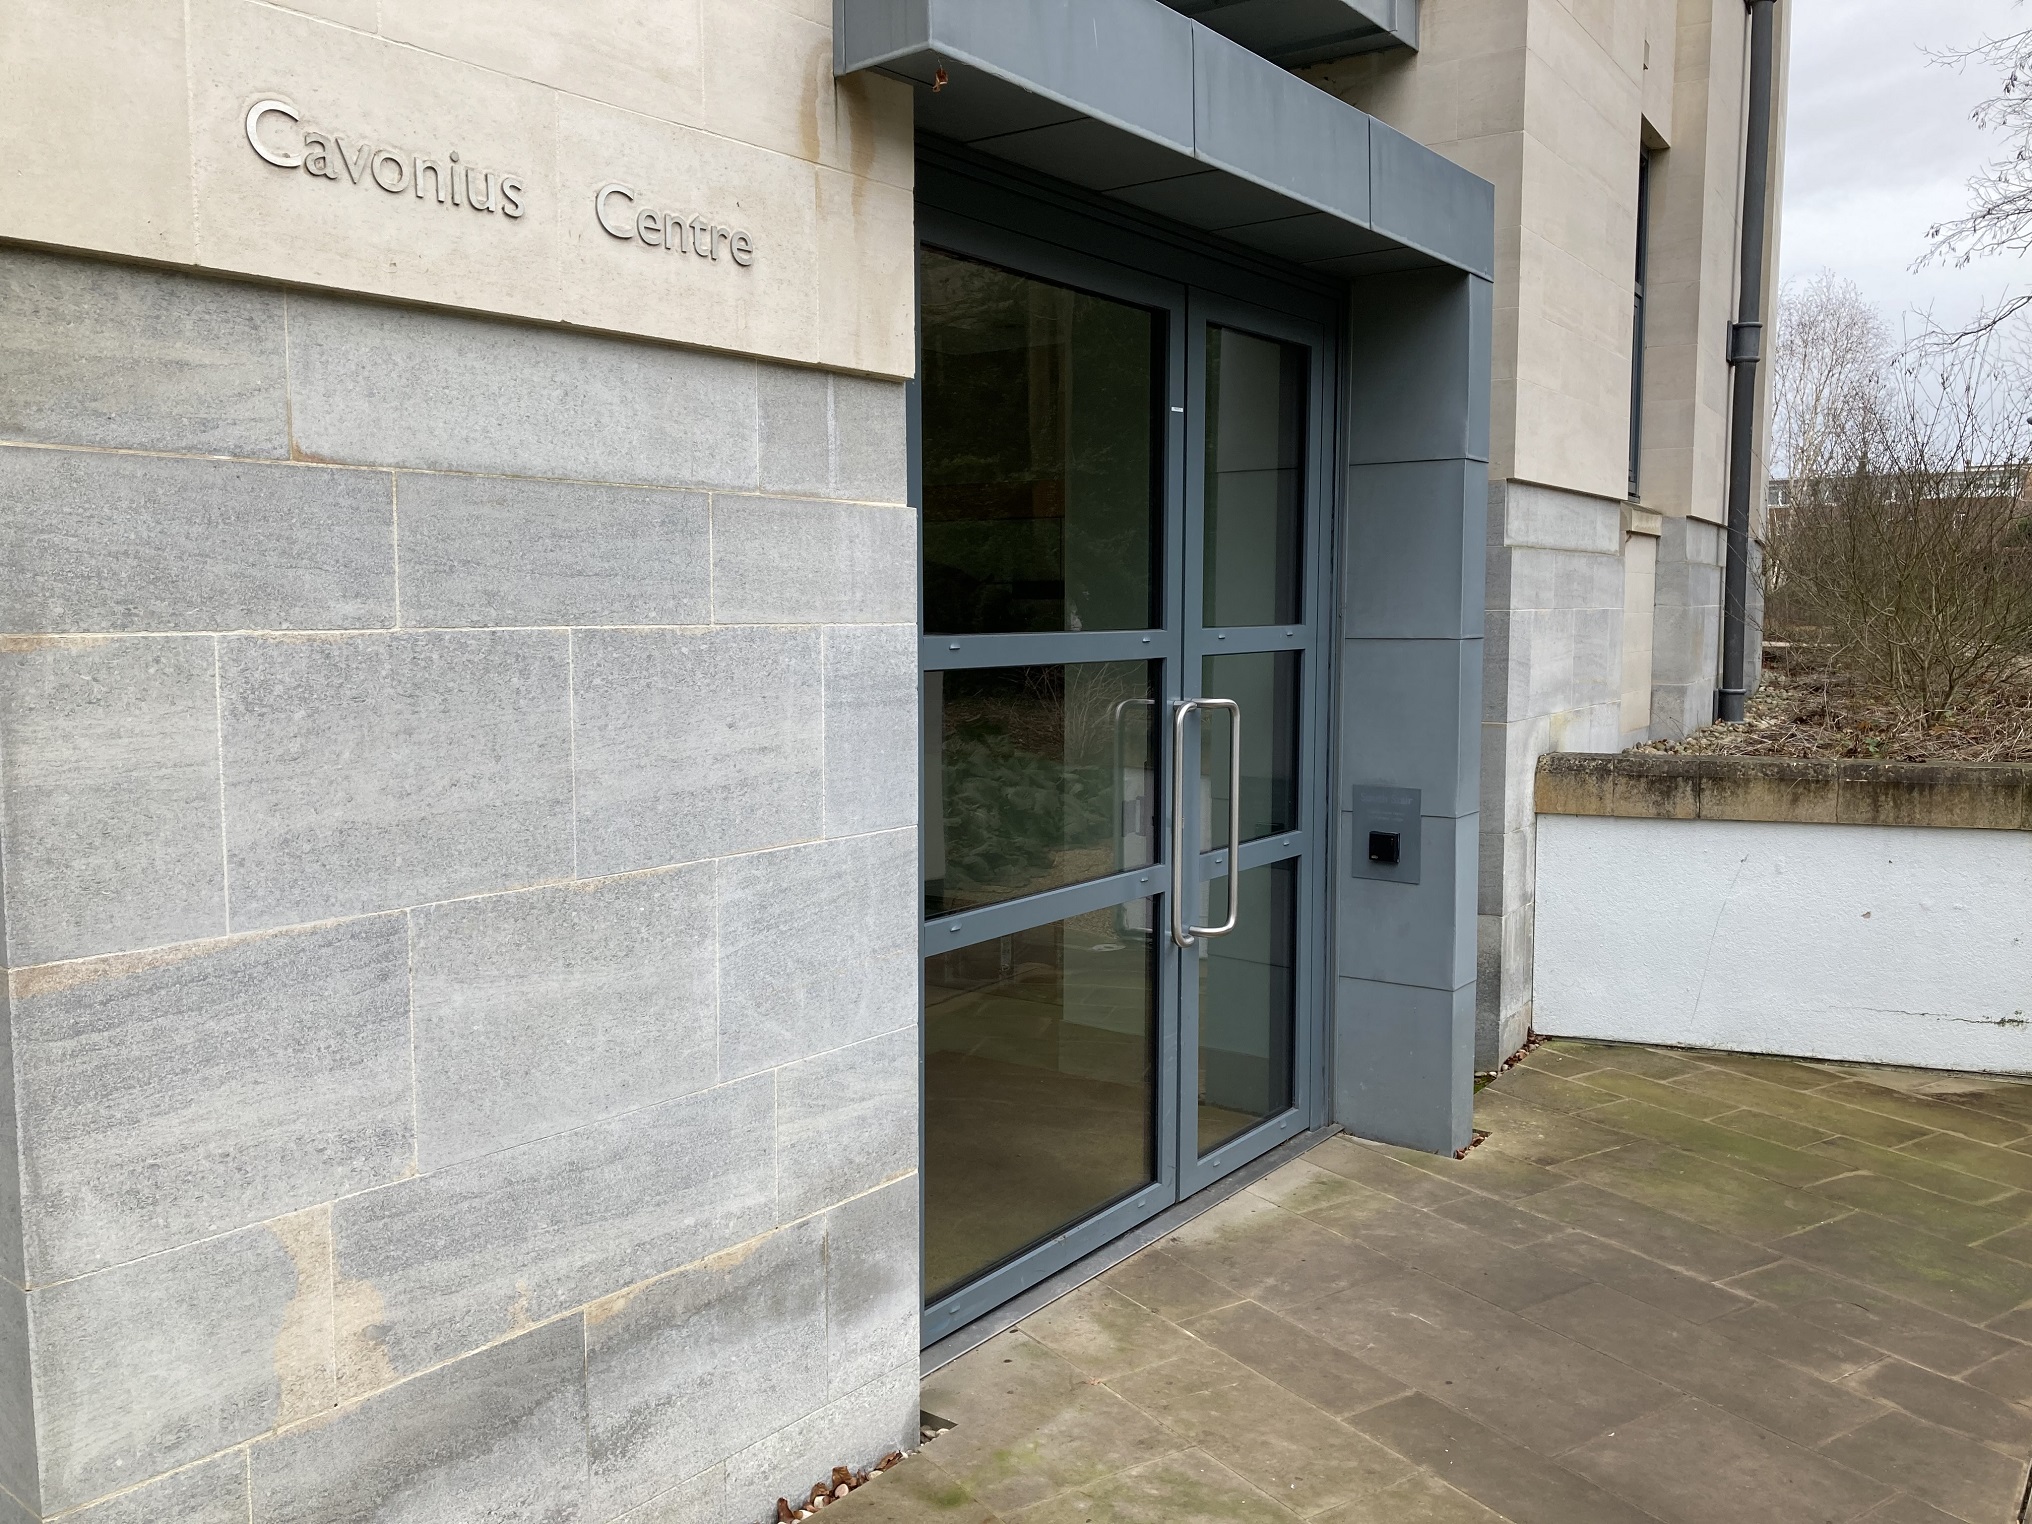 The entrance door to the Cavonius Centre